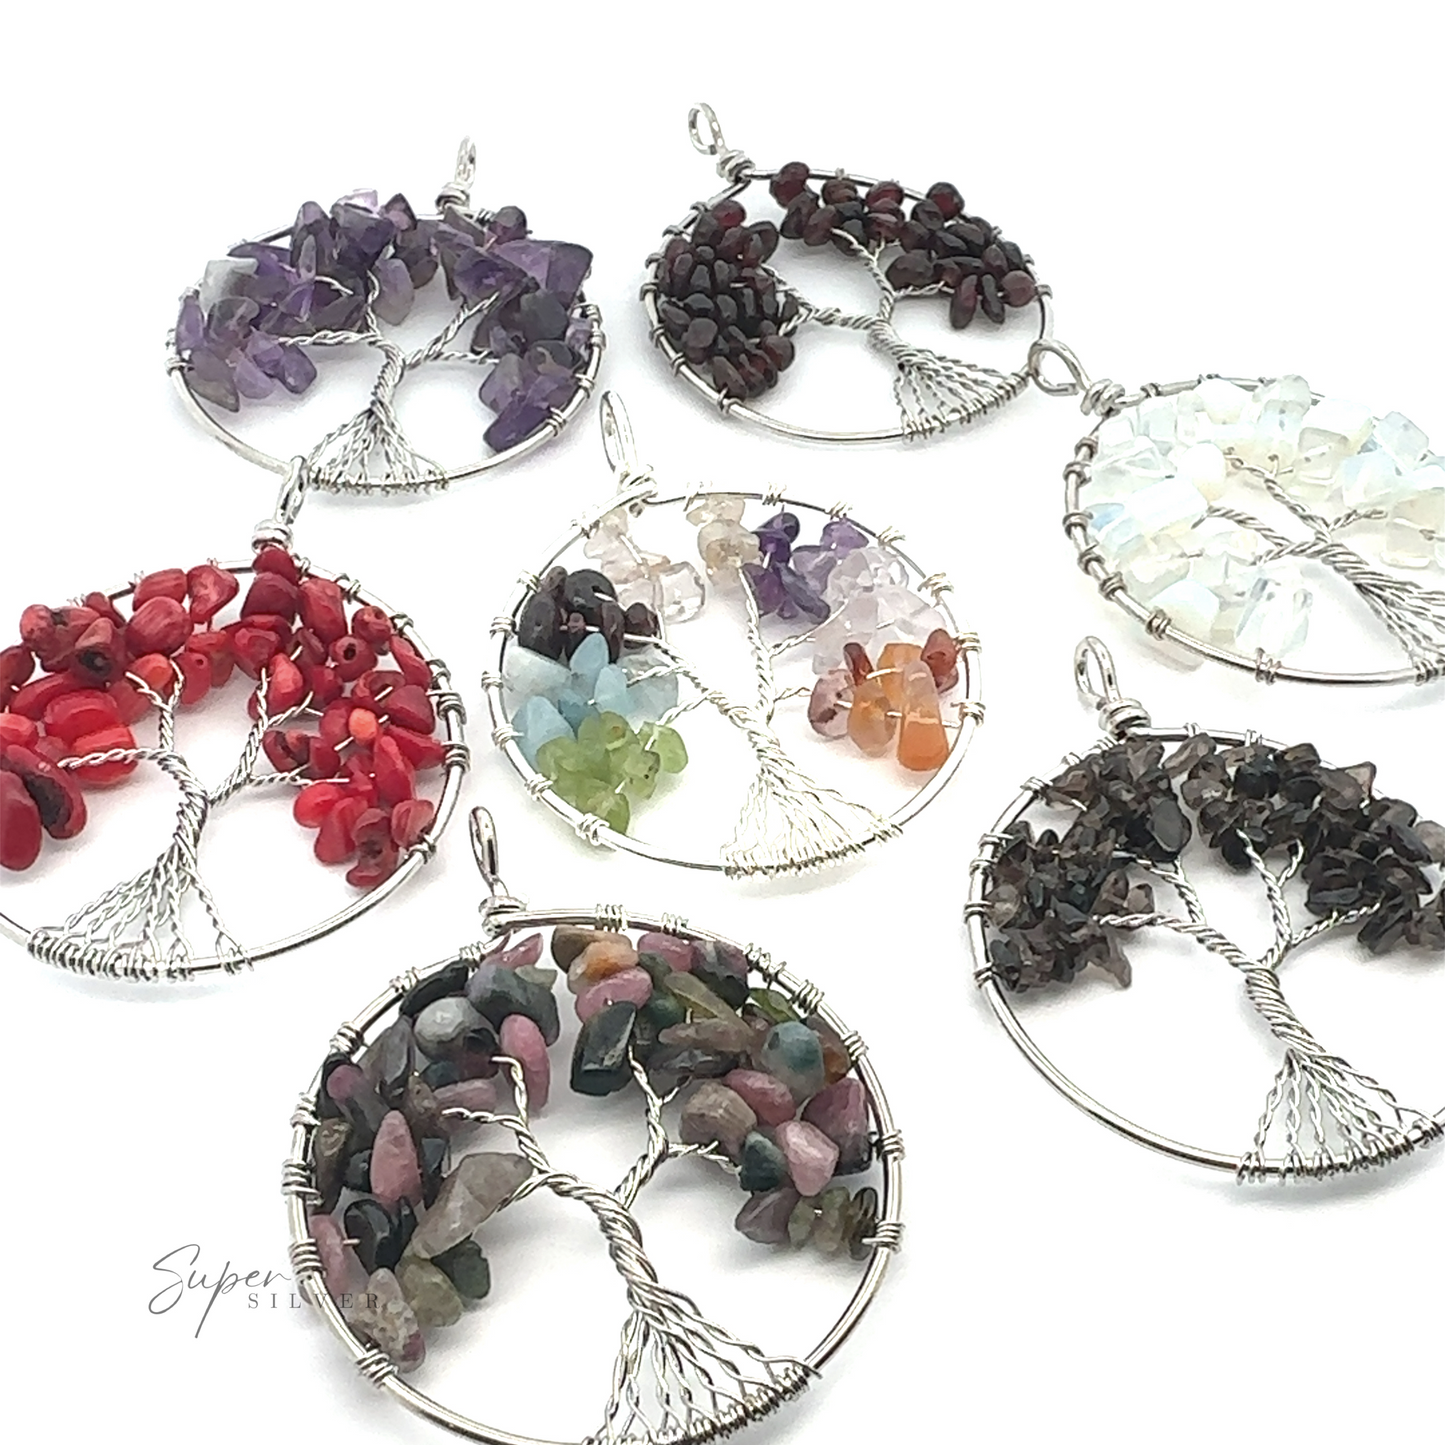 A group of Wire Wrapped Tree of Life Pendants crafted with mixed metals and adorned with different colored gemstones.